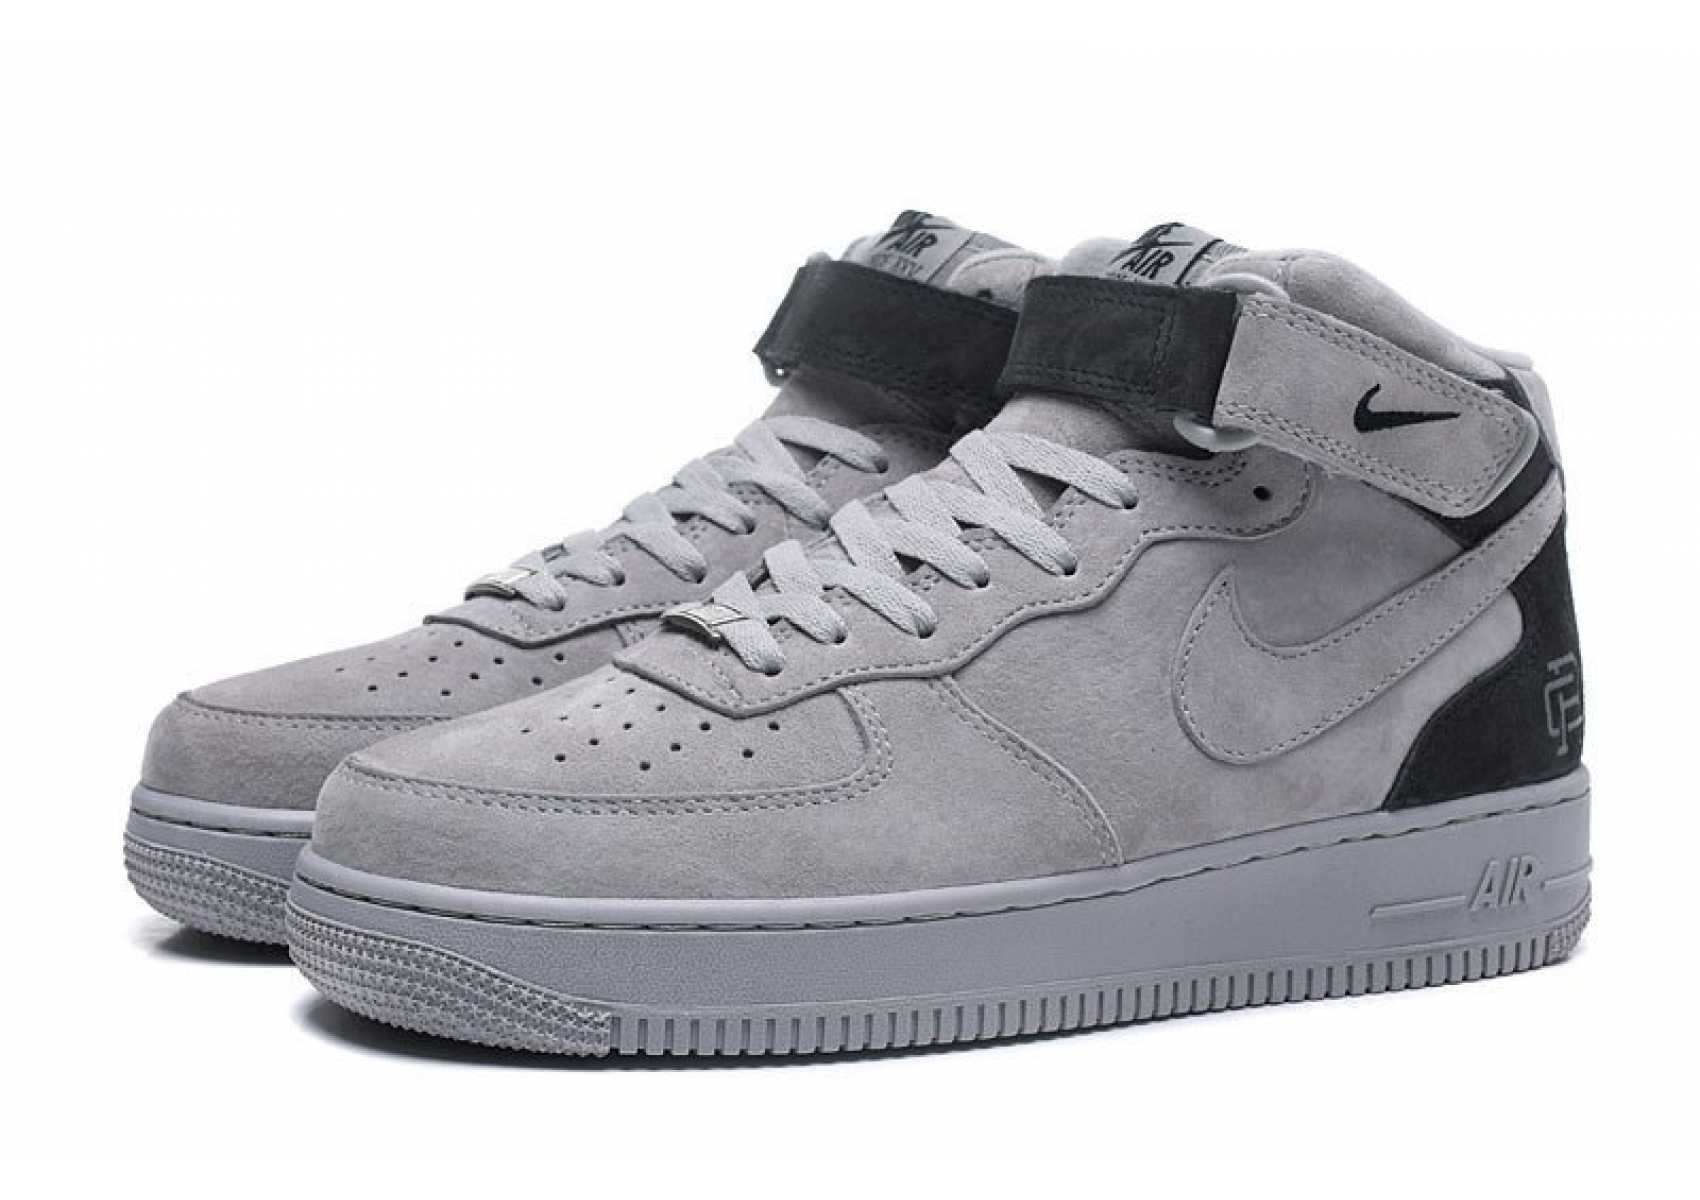 nike air force 1 mid 40